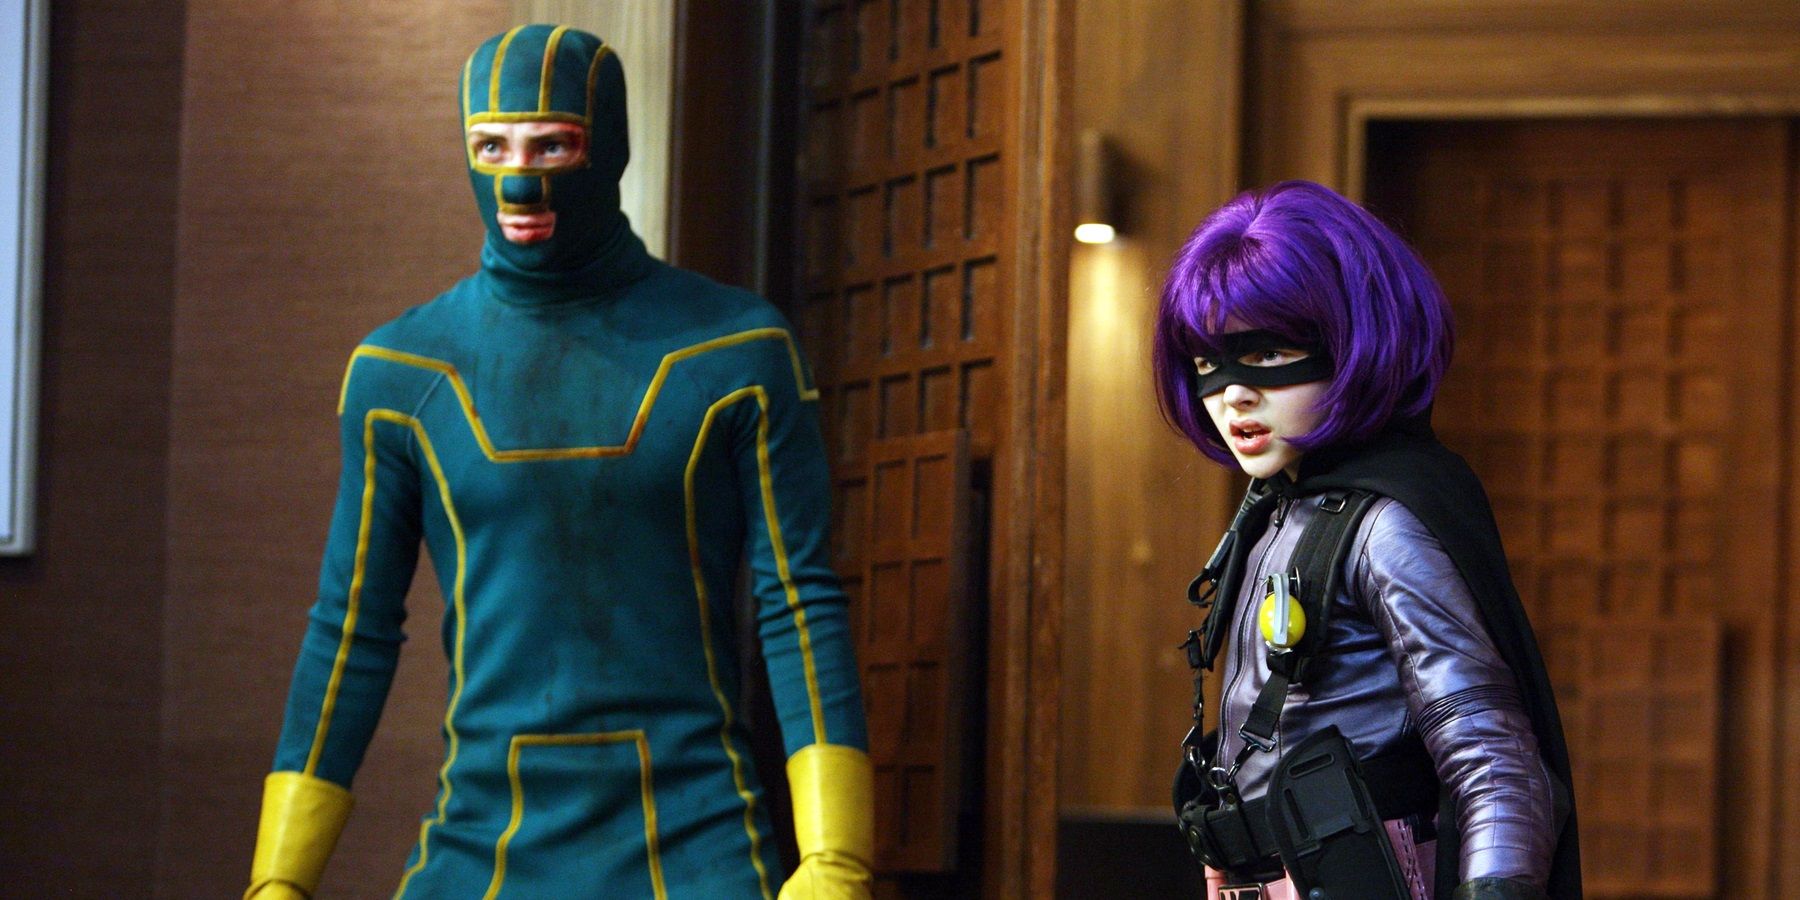 Kick-Ass and Hit-Girl prepare for the final battle